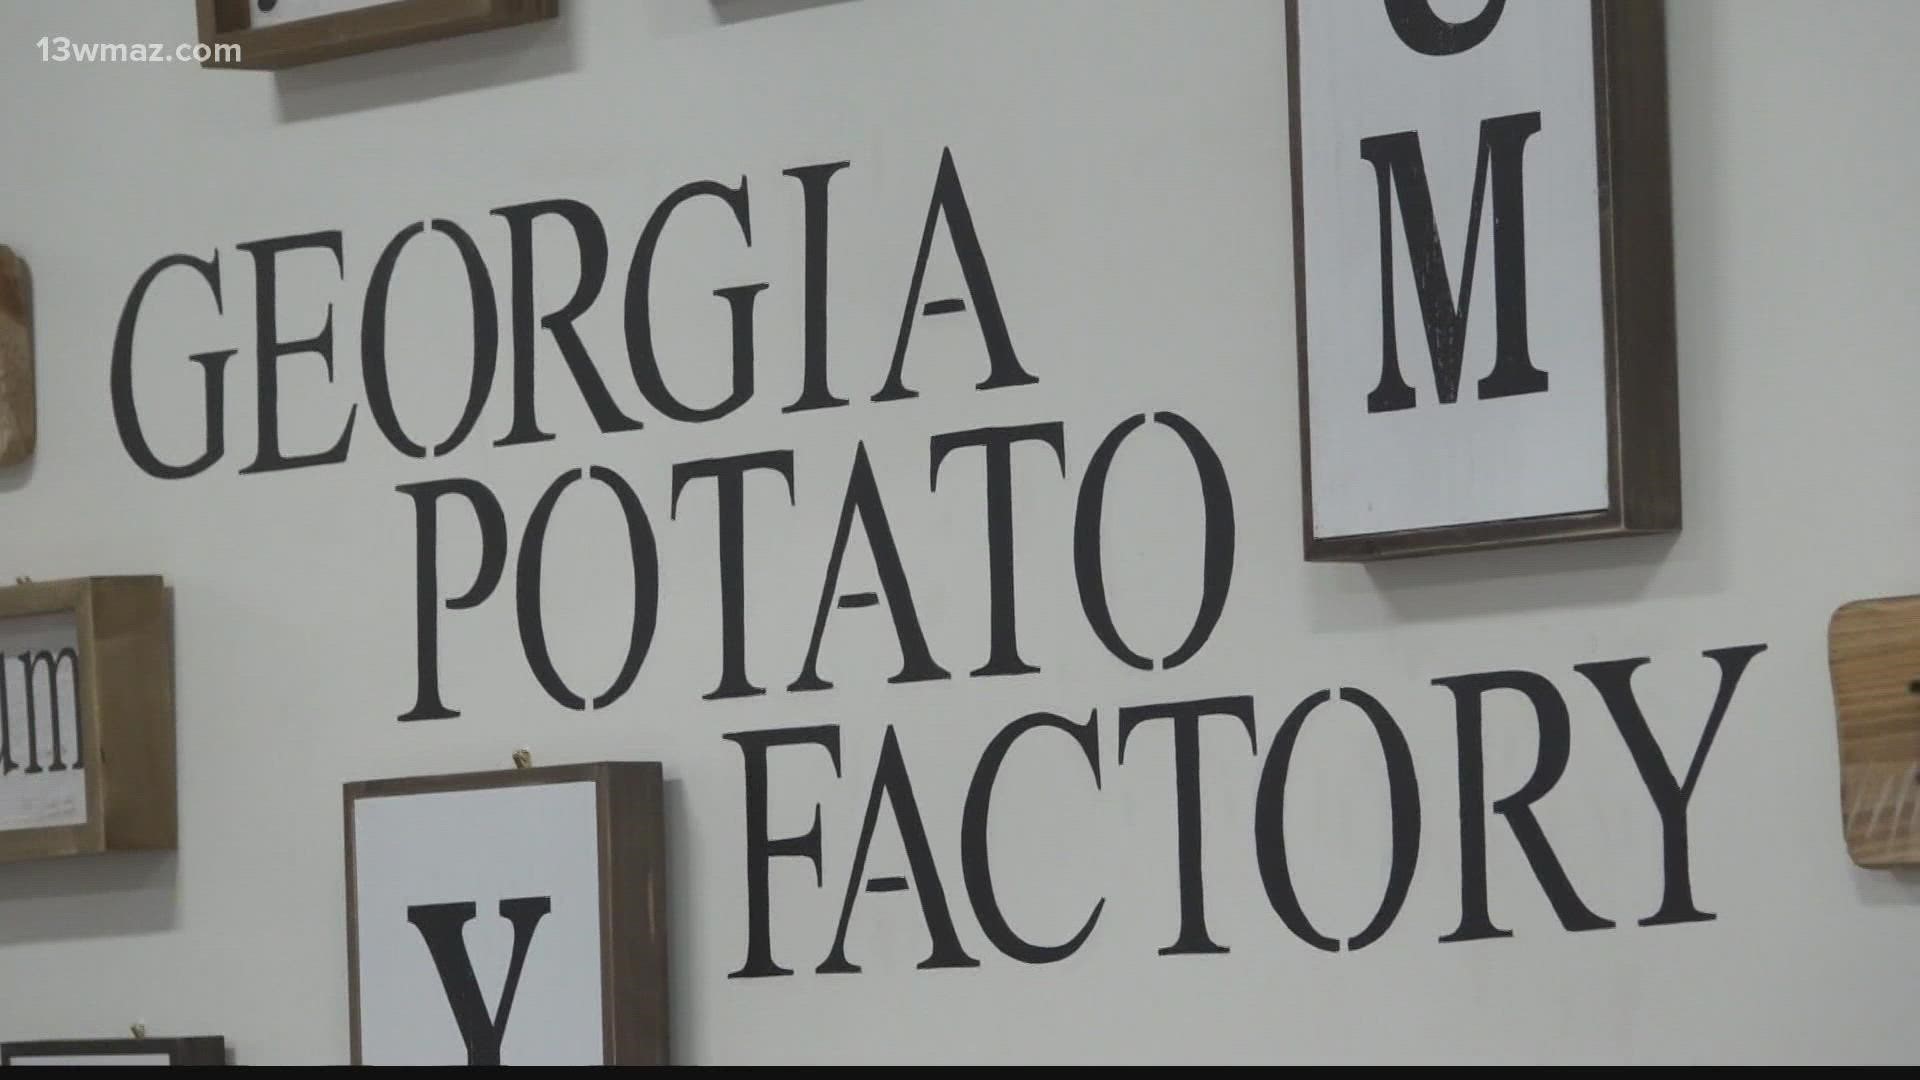 The Georgia Potato Factory has only been open for about 5 weeks, but their menu is already reeling people in.